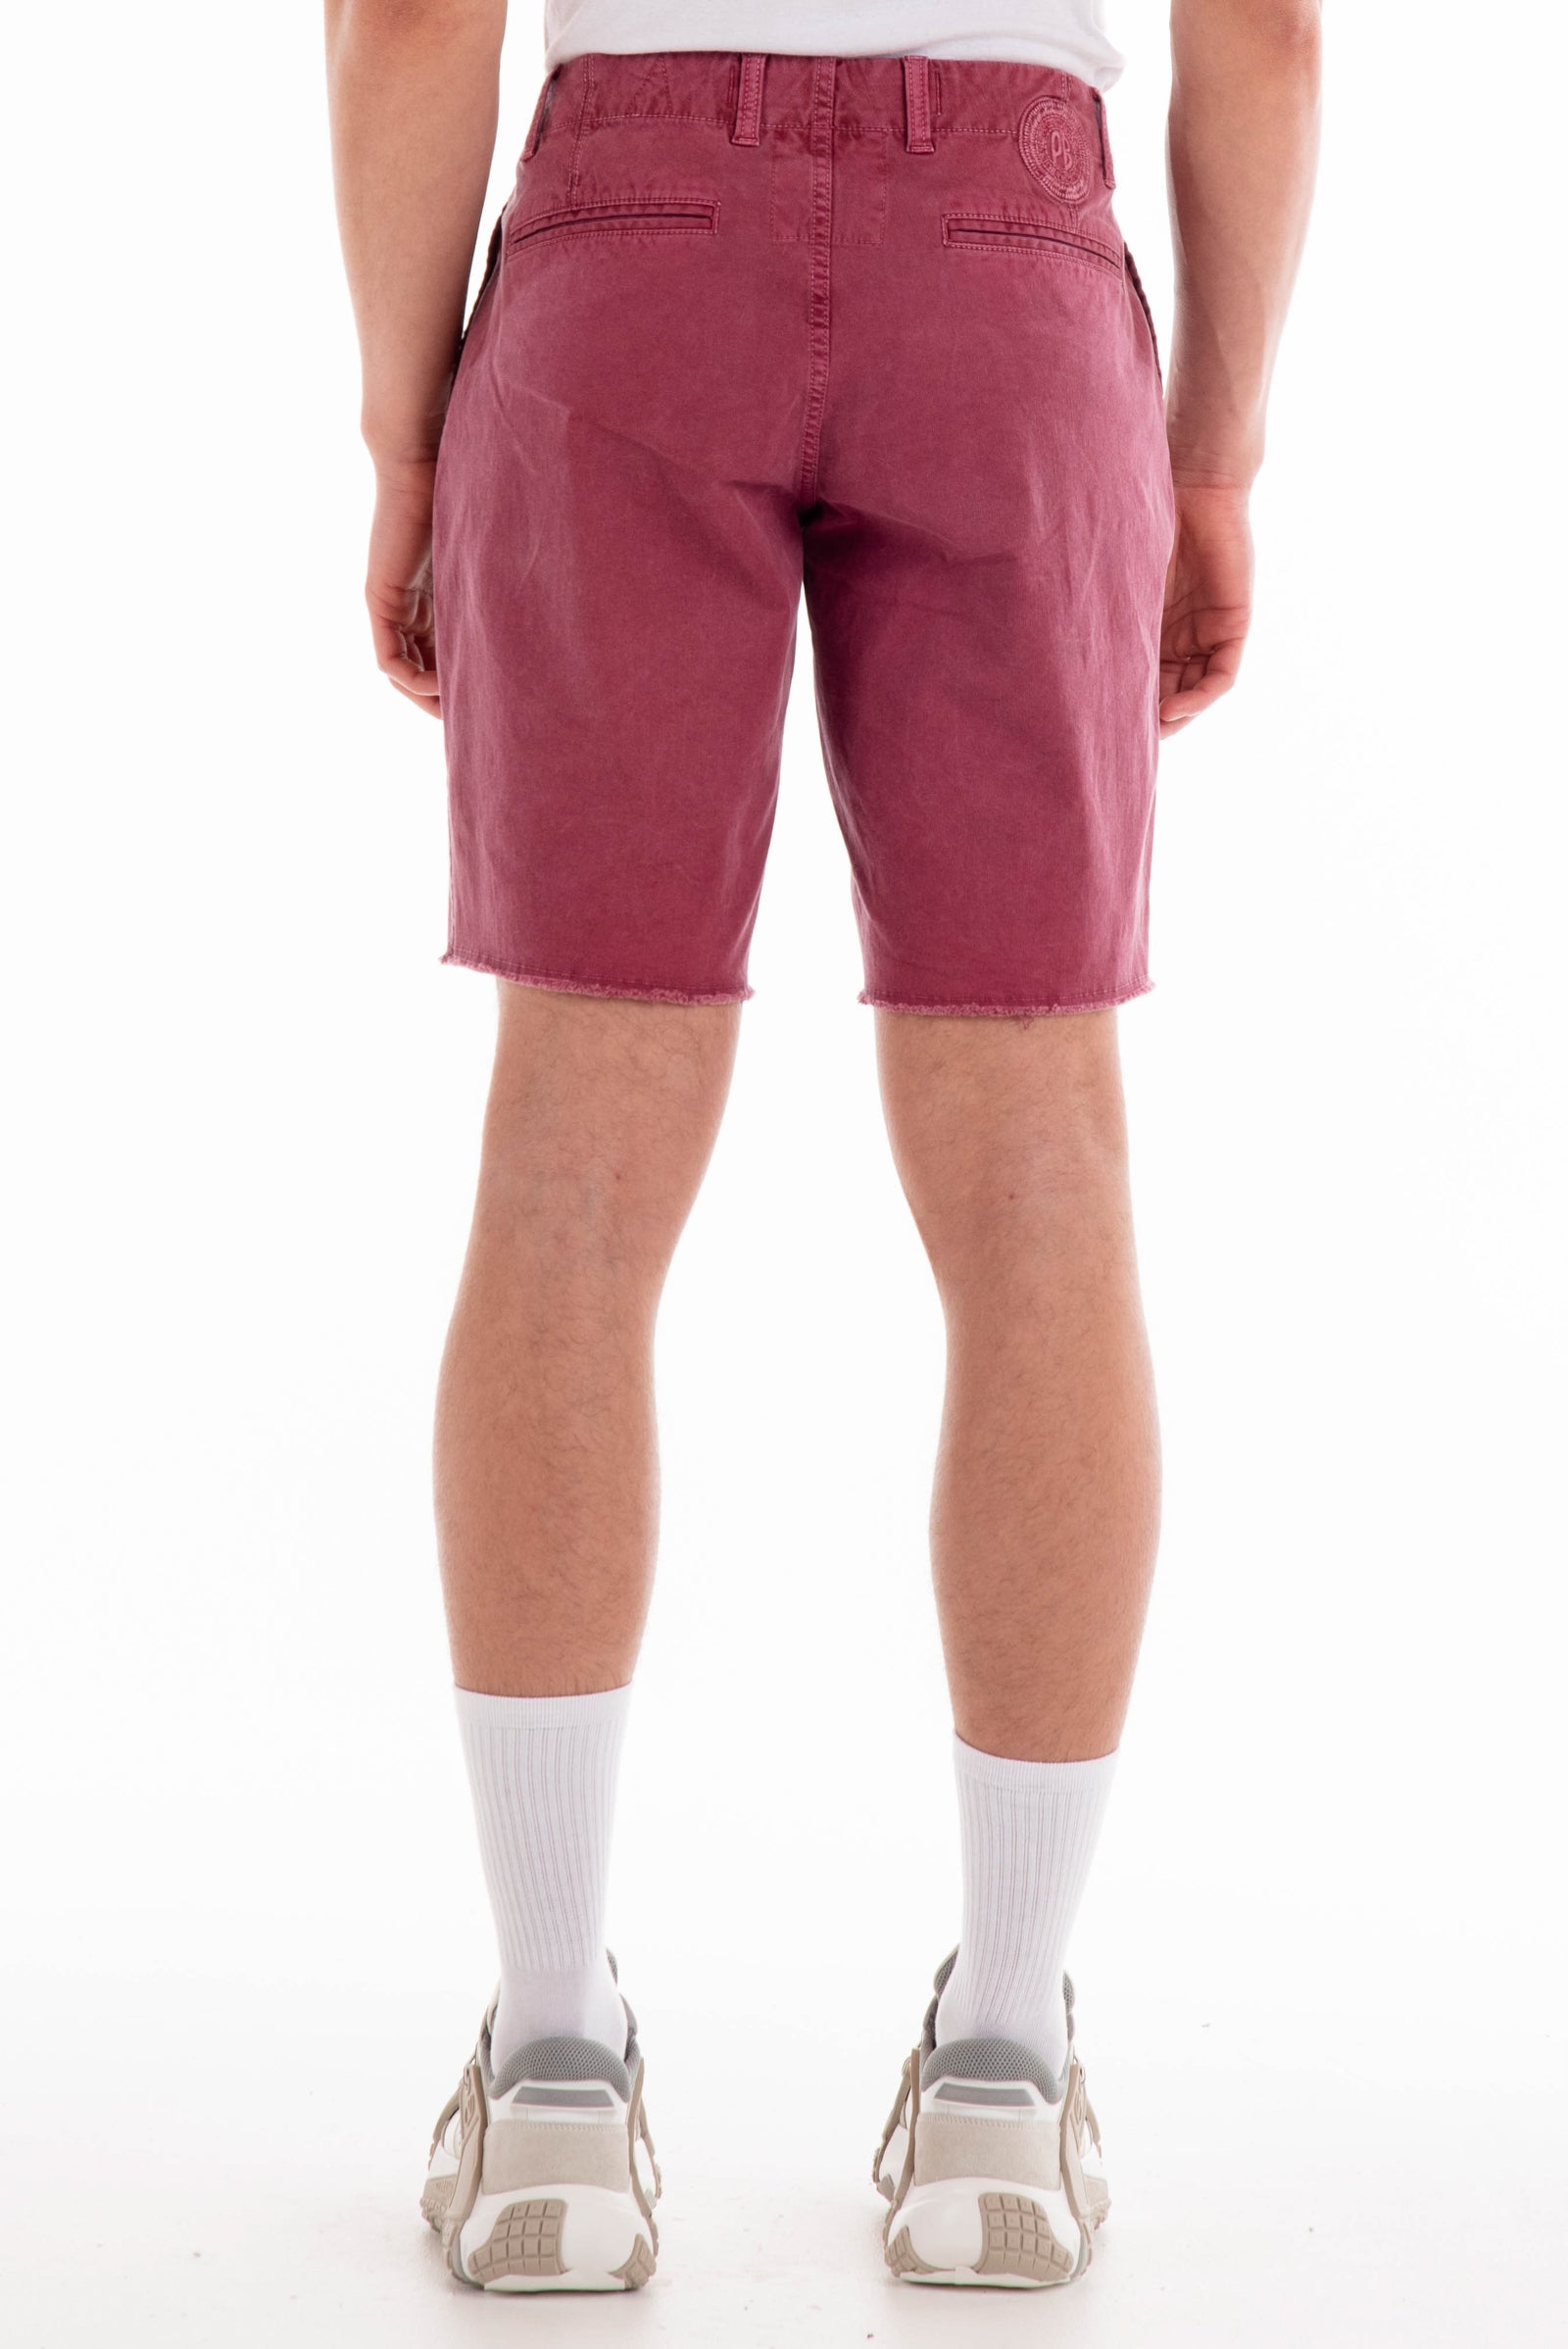 Original Paperbacks Rockland Chino Short in Crushed Berry on Model Cropped Back View